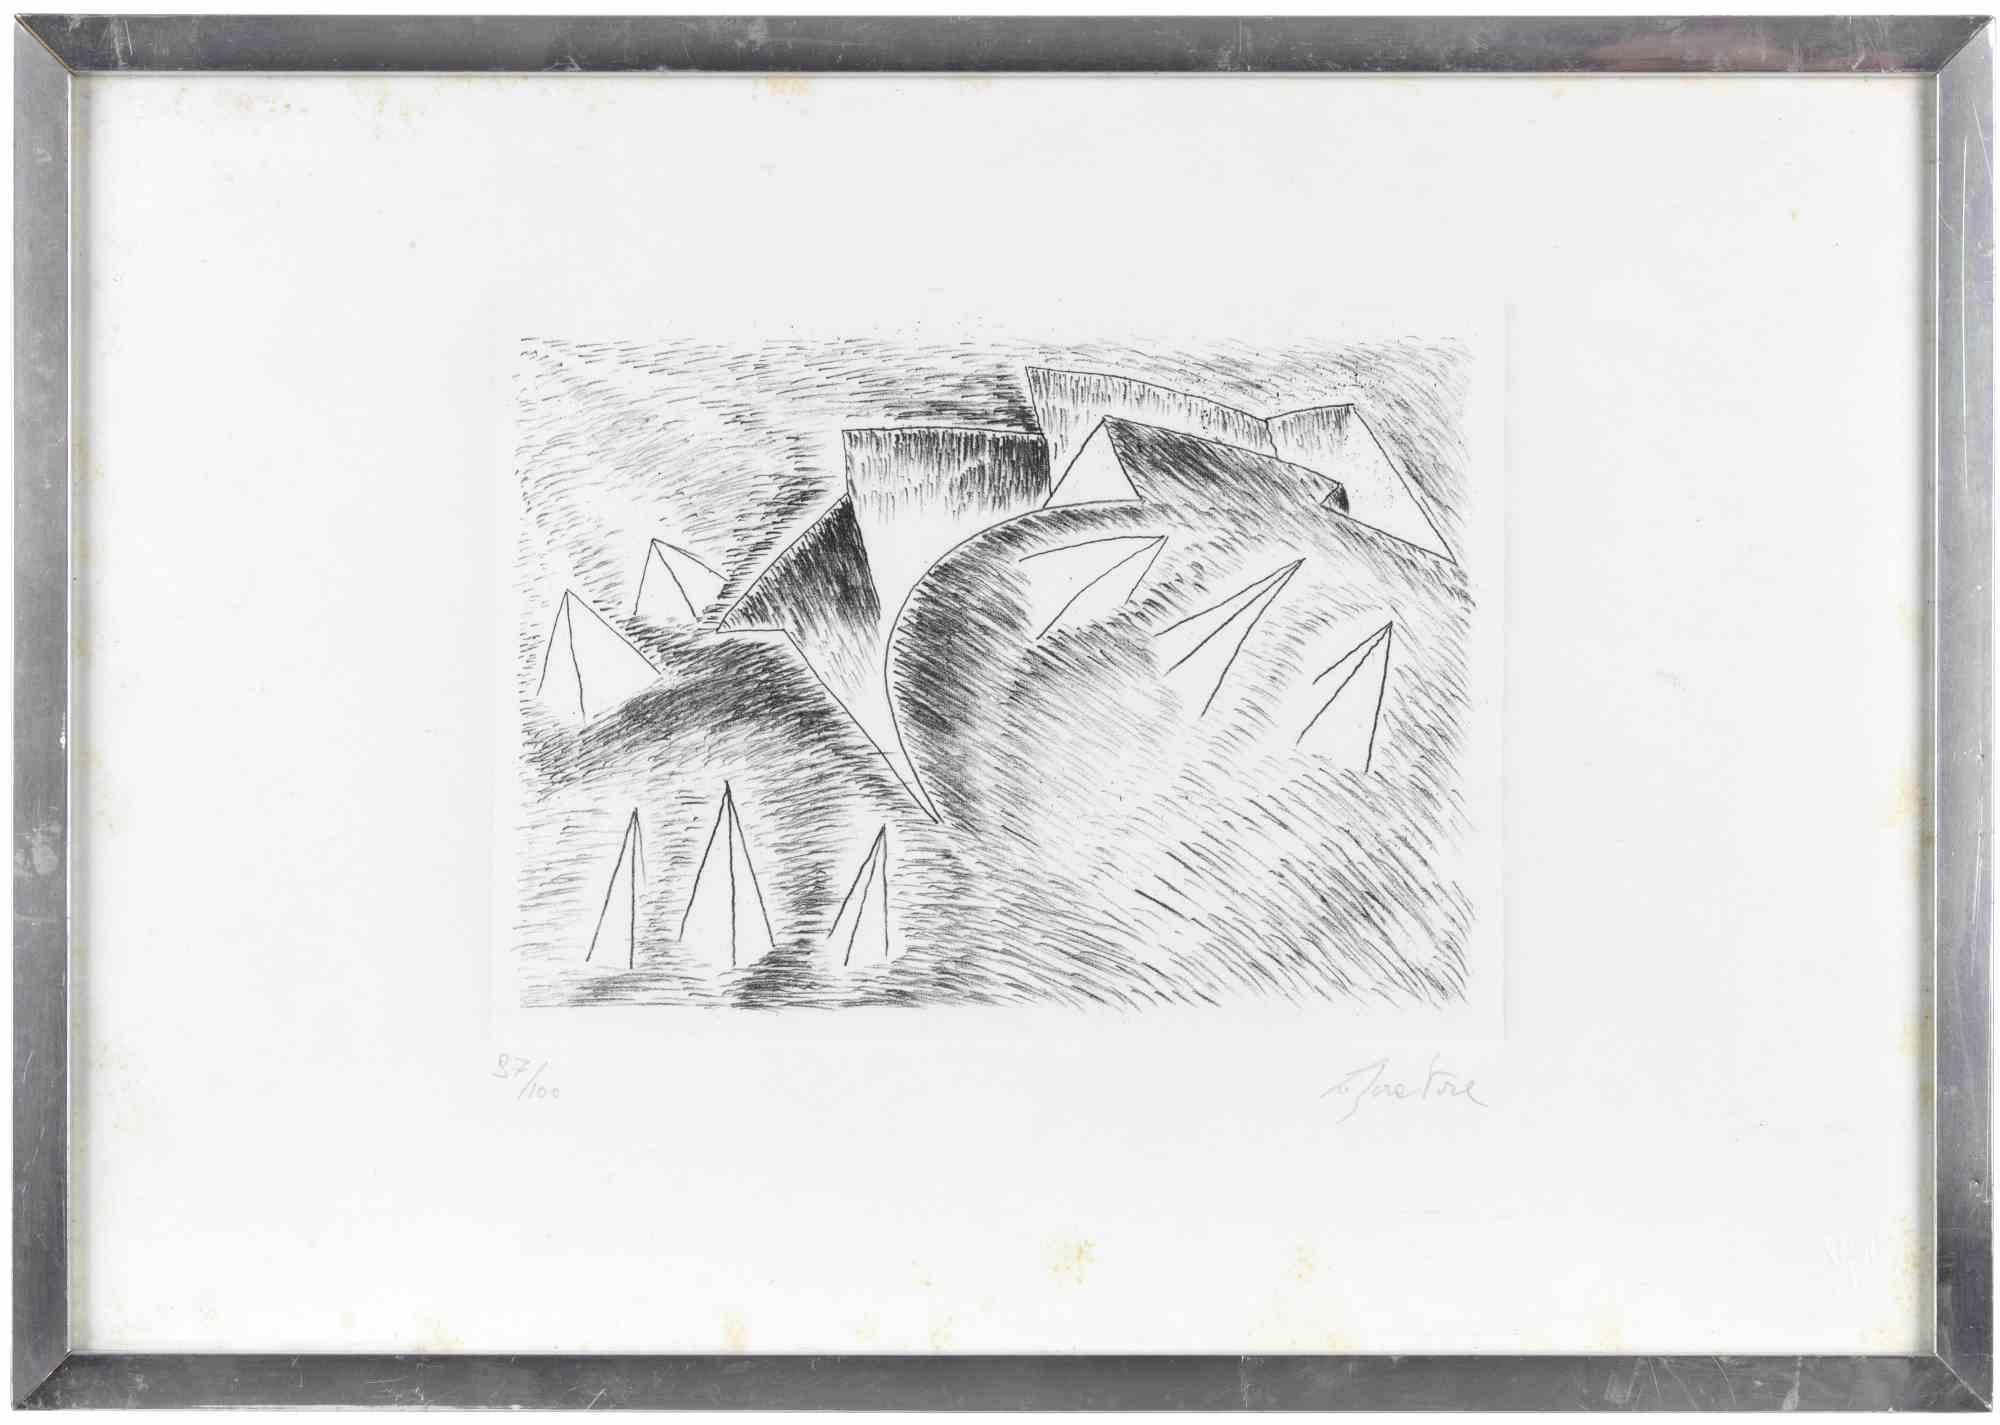 Sailing is a contemporary artwork realized by Bruno Liberatore.

Black and white lithograph.

Hand signed and numbered on the lower margin.

Edition of 97/100.

Includes frame.